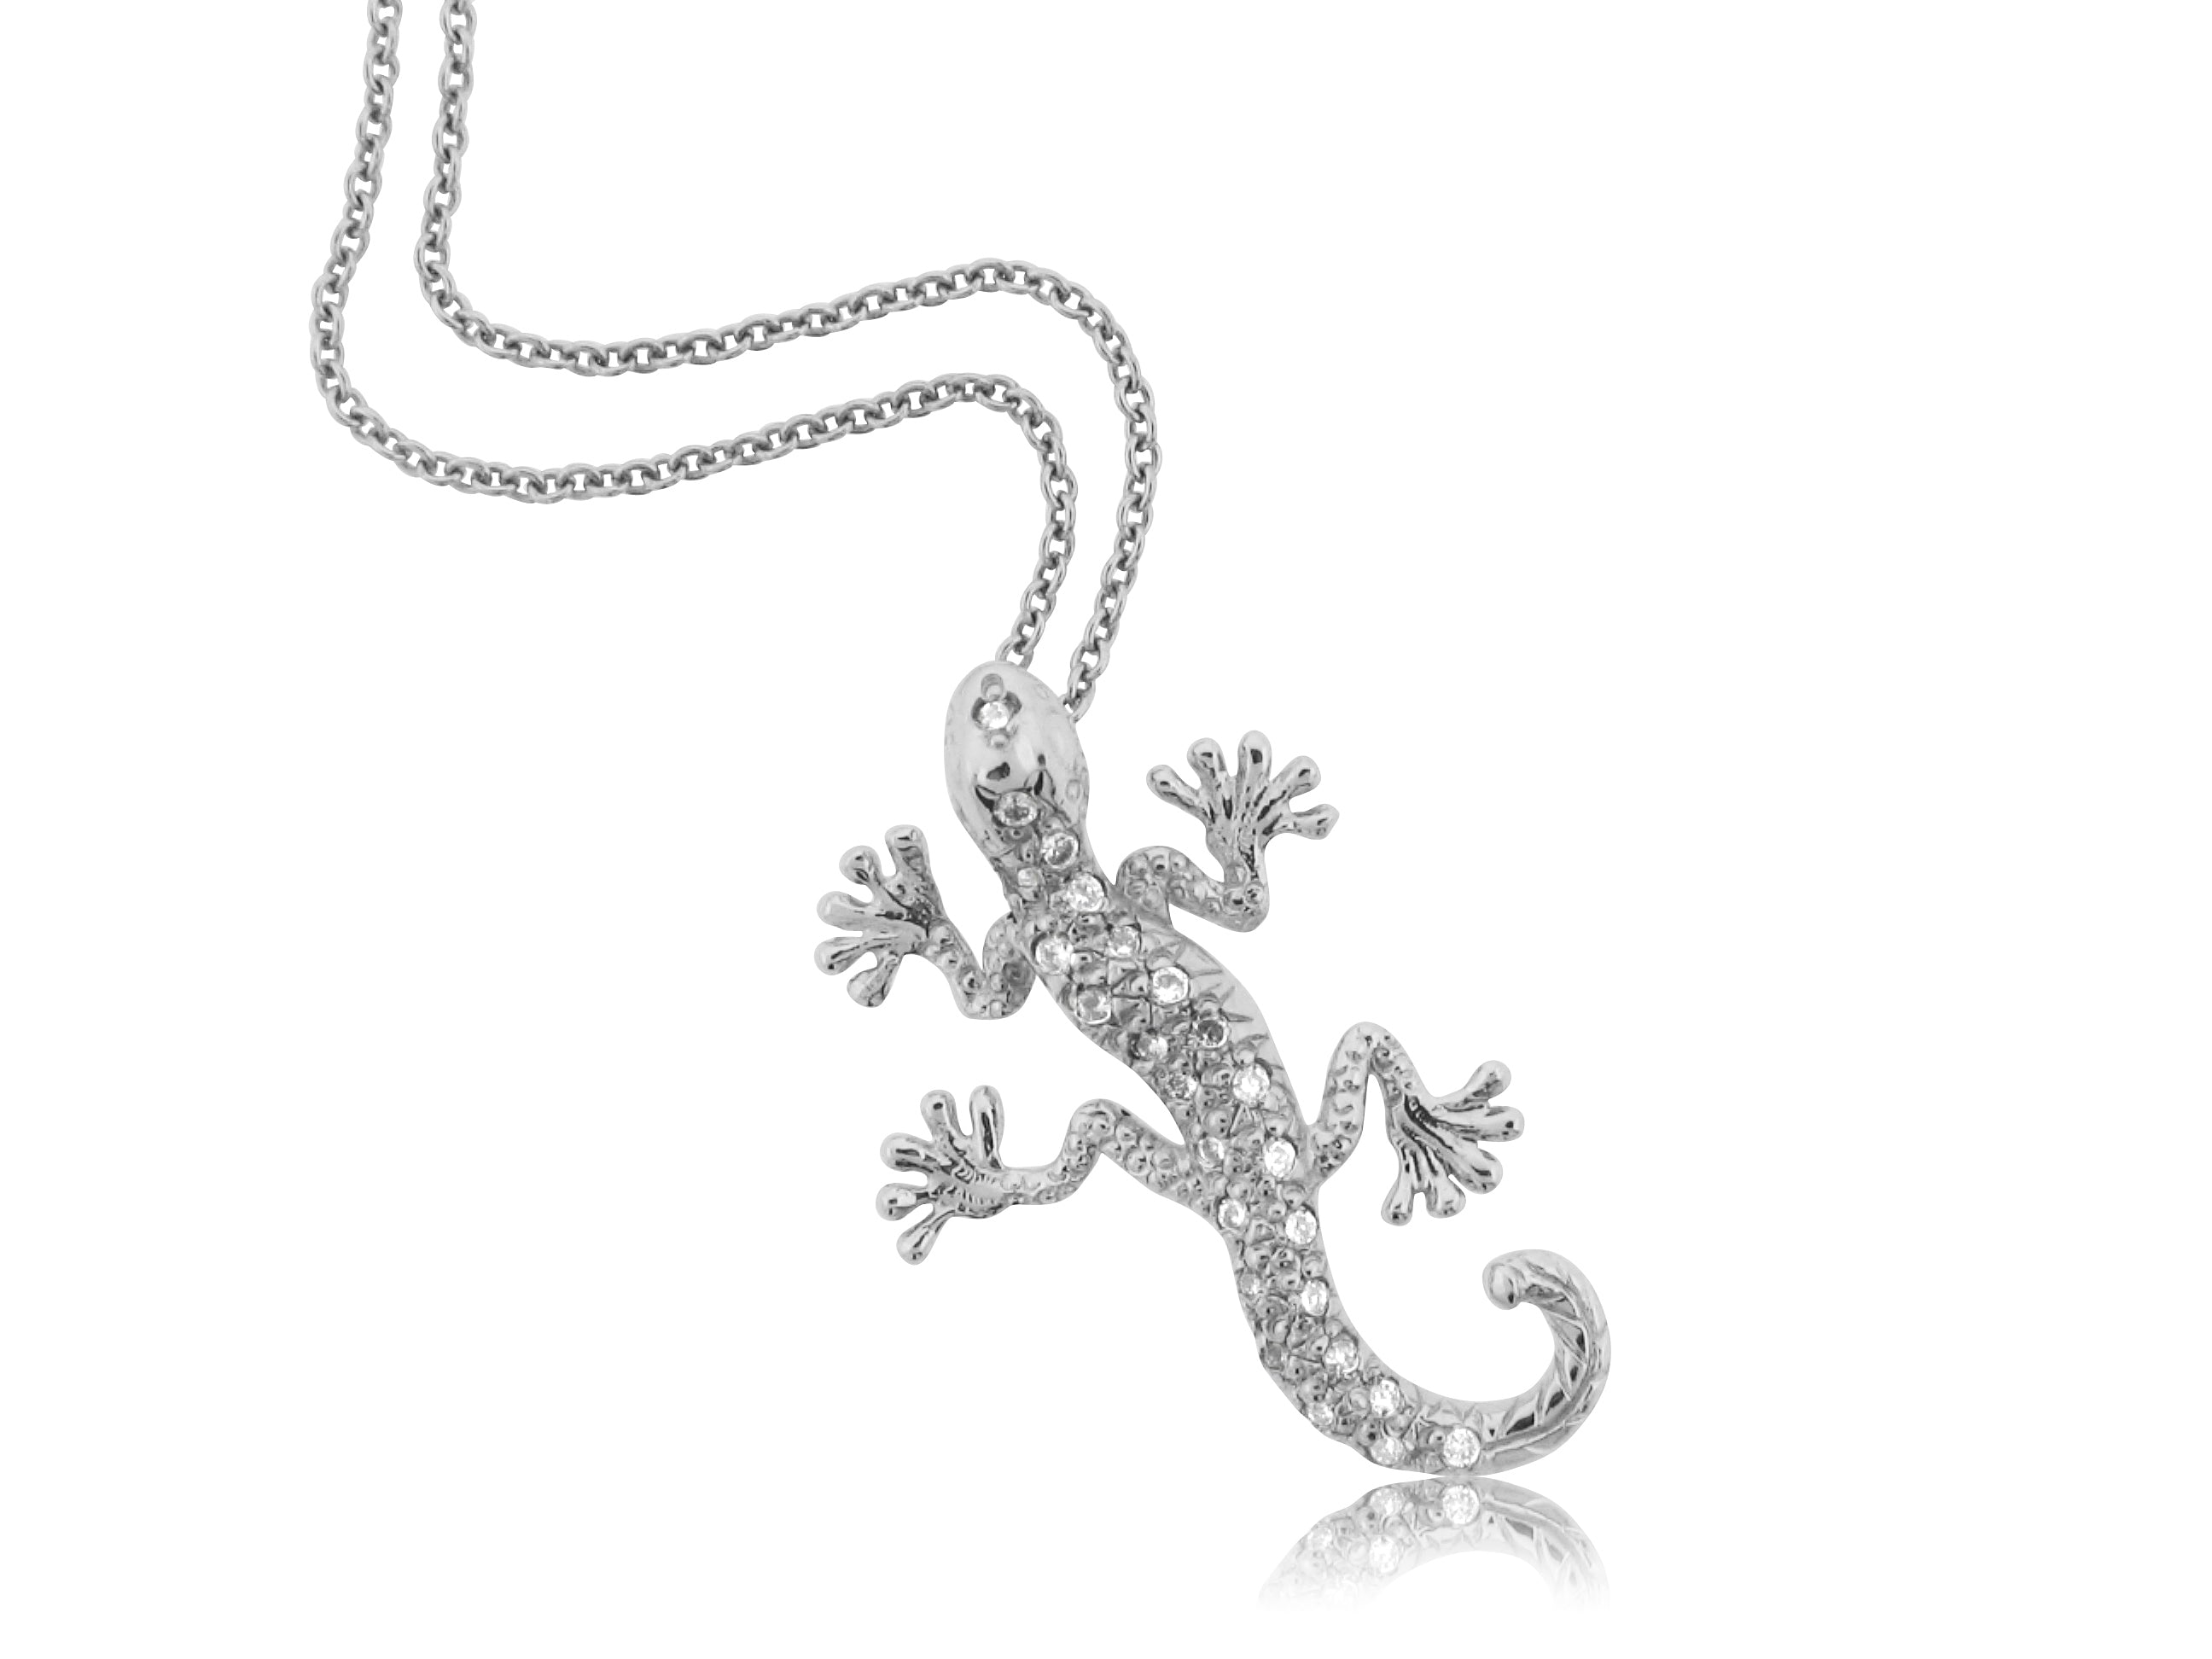 ROBERTO COIN 18K WHITE GOLD 0.11CT SI/G DIAMOND GECKO PENDANT FROM THE TINY TREASURES COLLECTION